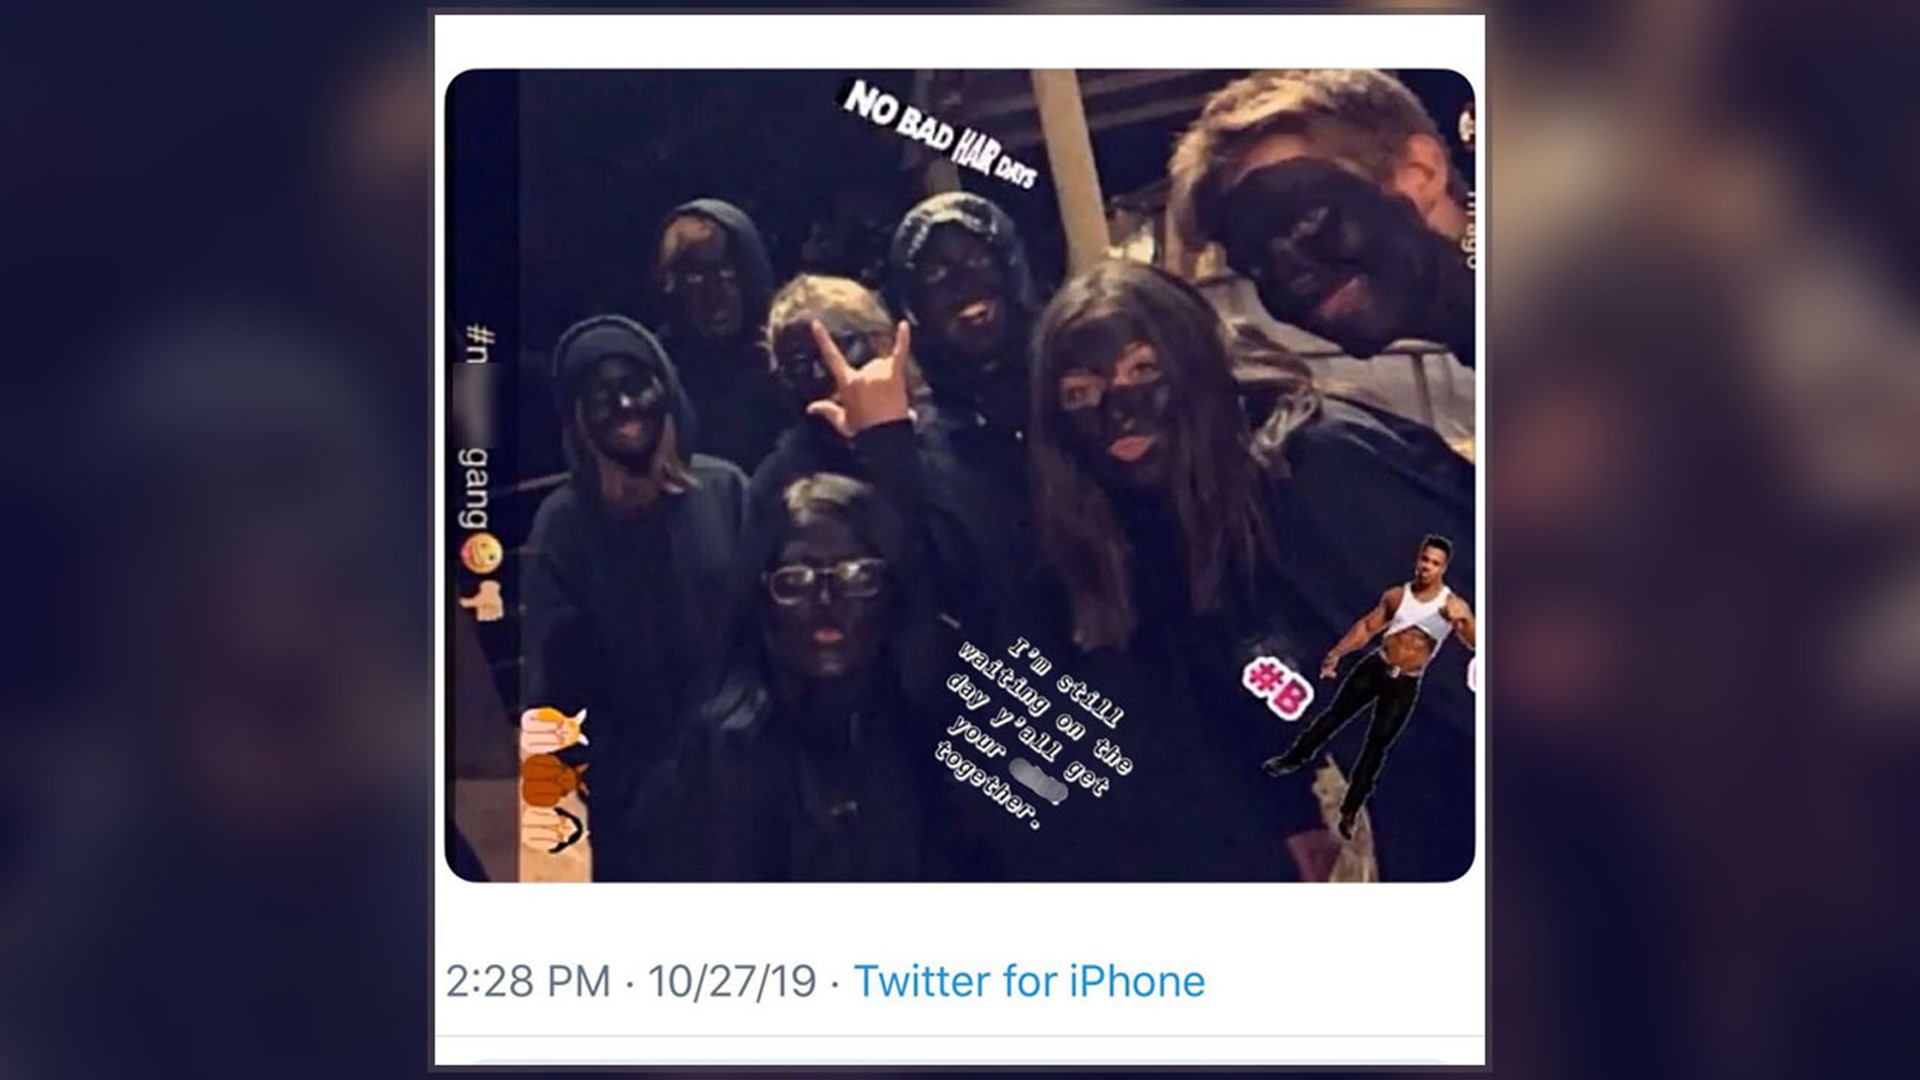 A group of high school students in Lebanon, Oregon allegedly wore blackface to a gathering last weekend, sparking outrage.